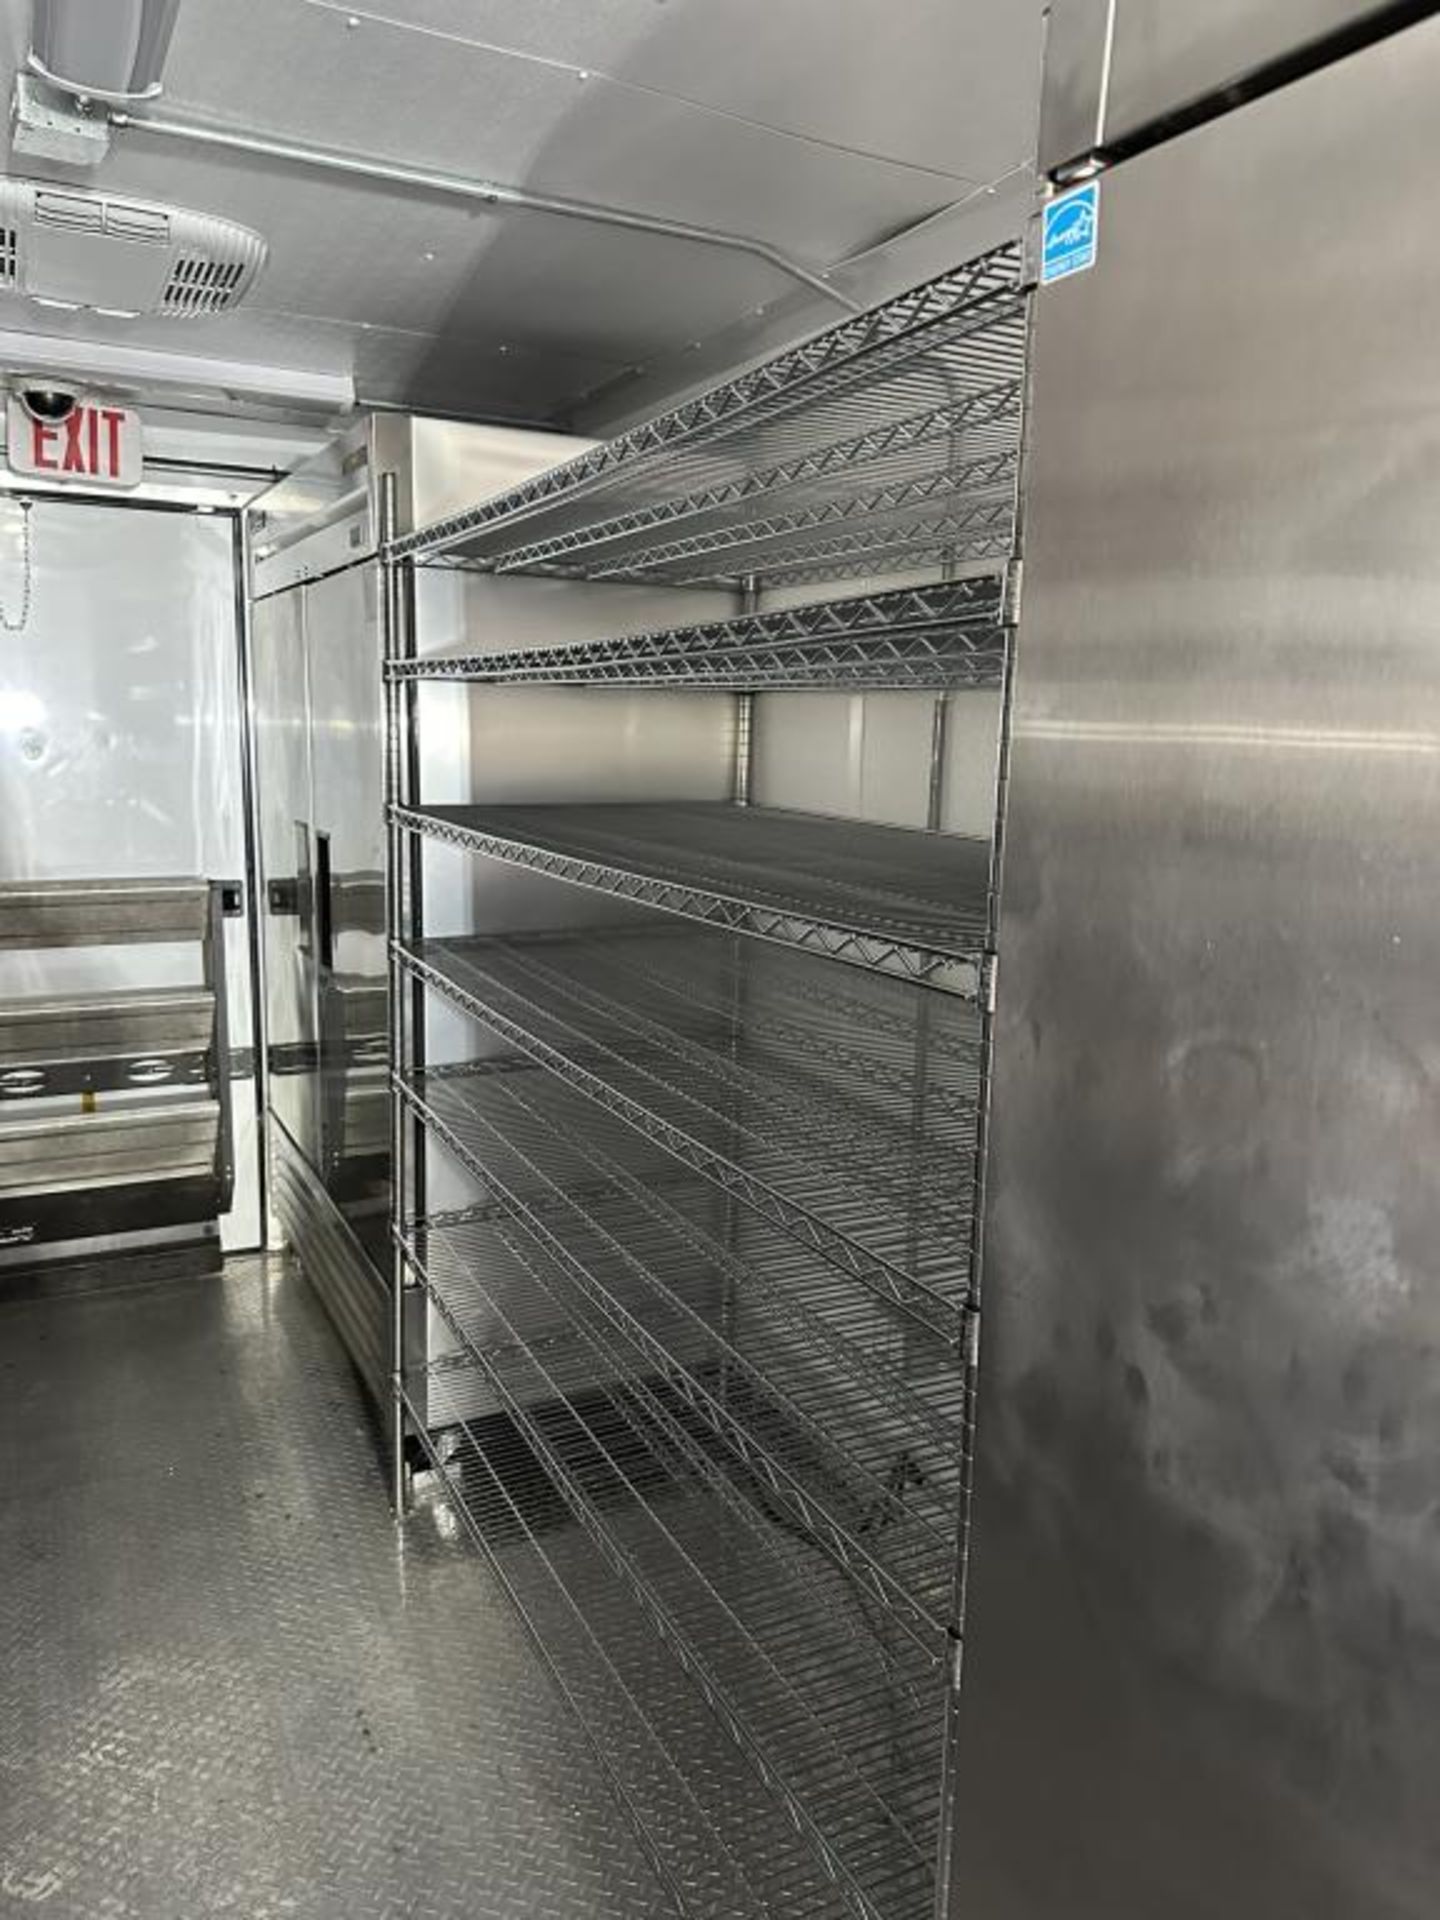 2021 Food Service Support Trailer - Image 10 of 18